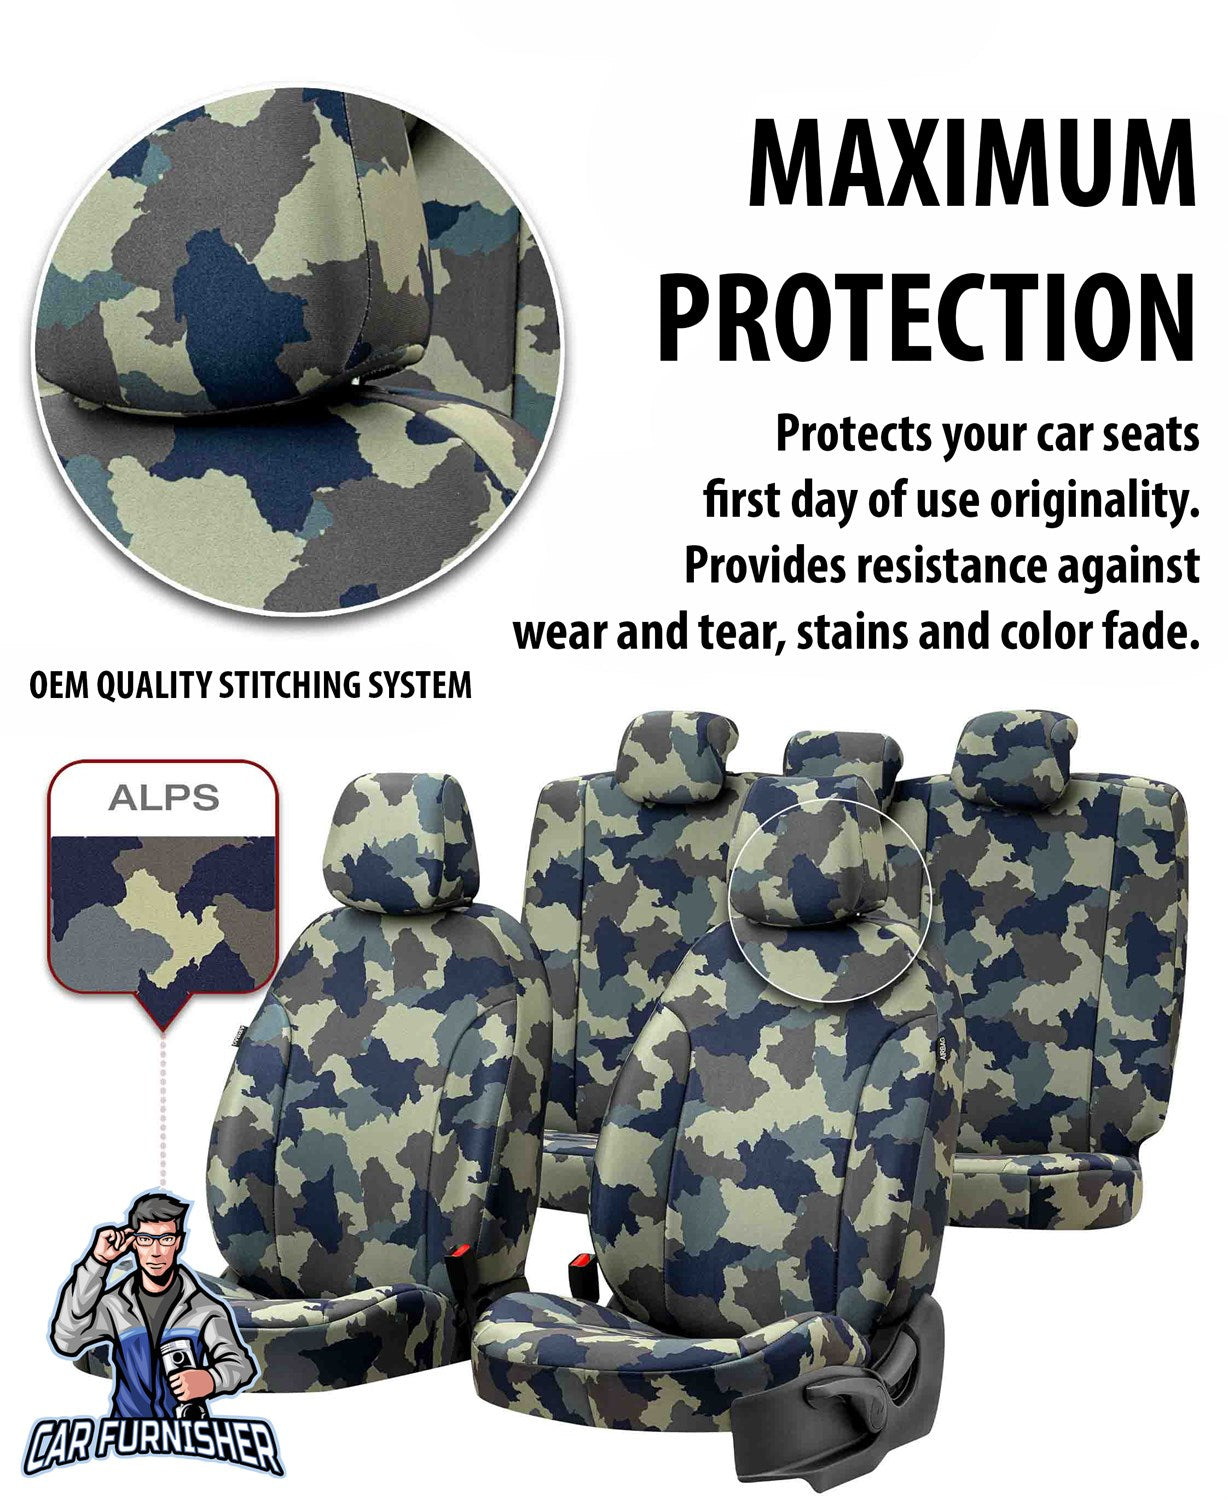 Dacia Duster Seat Covers Camouflage Waterproof Design Everest Camo Waterproof Fabric